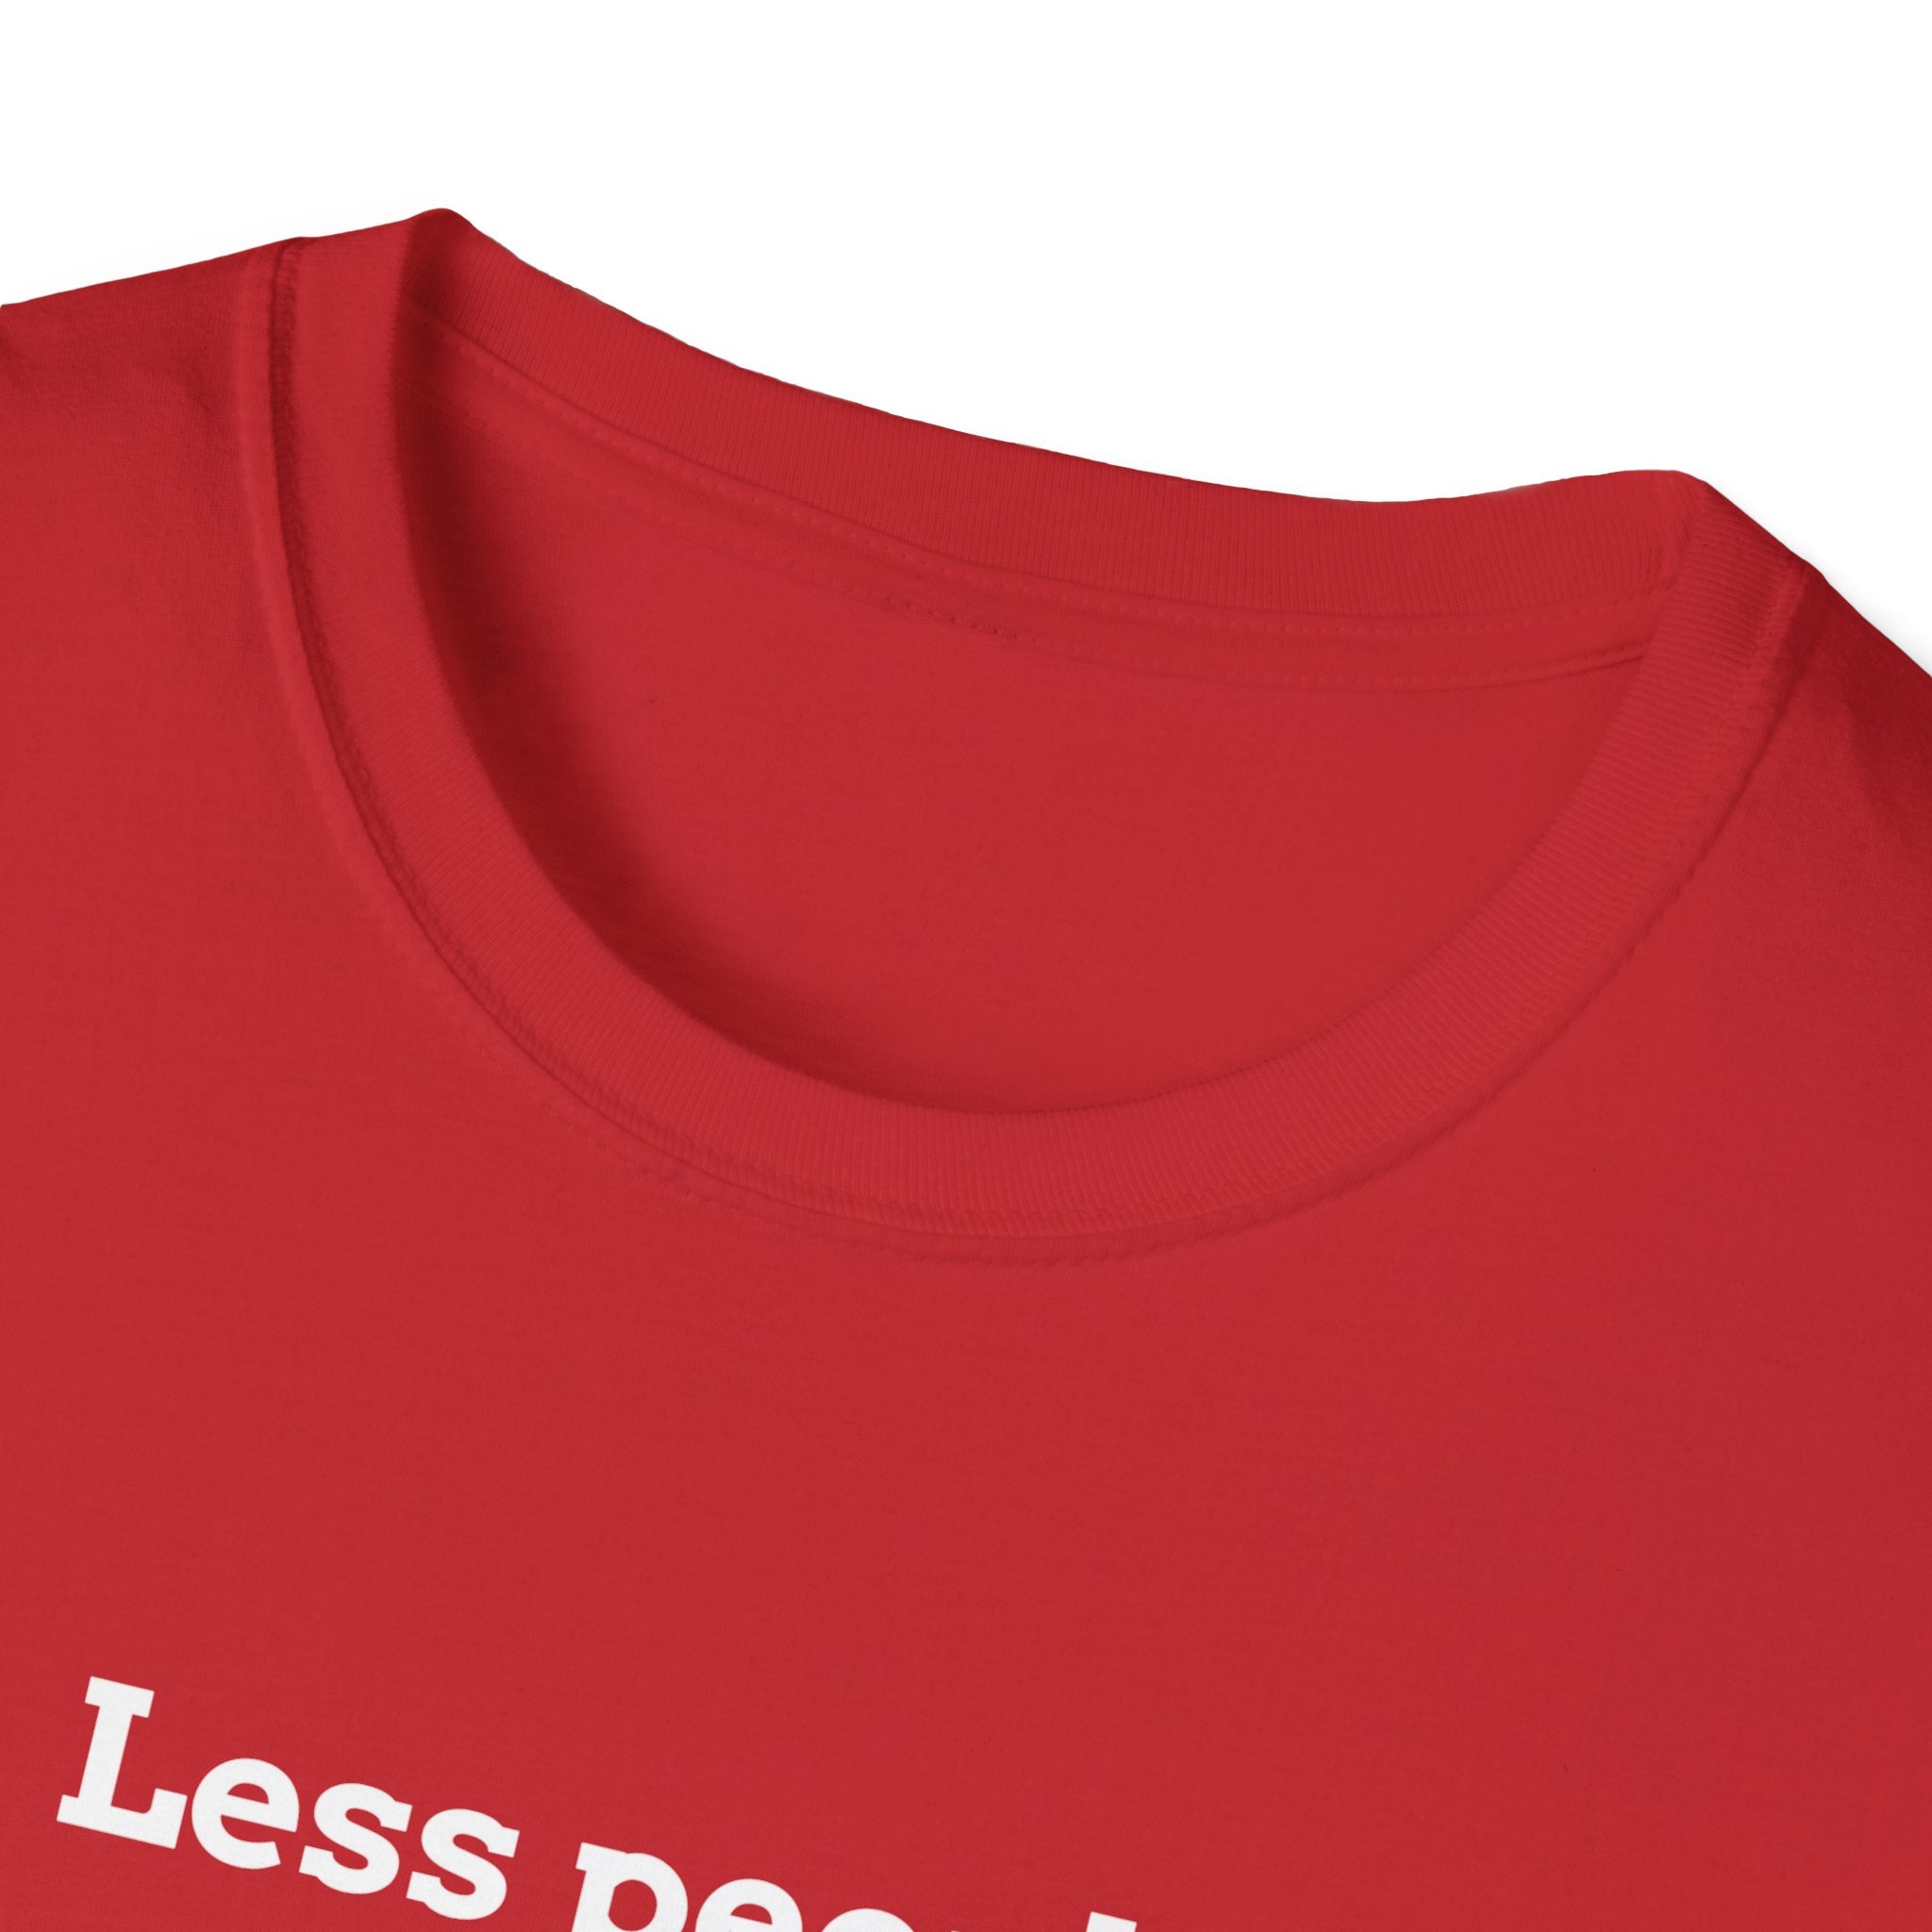 Less People. More Cats. T-Shirt